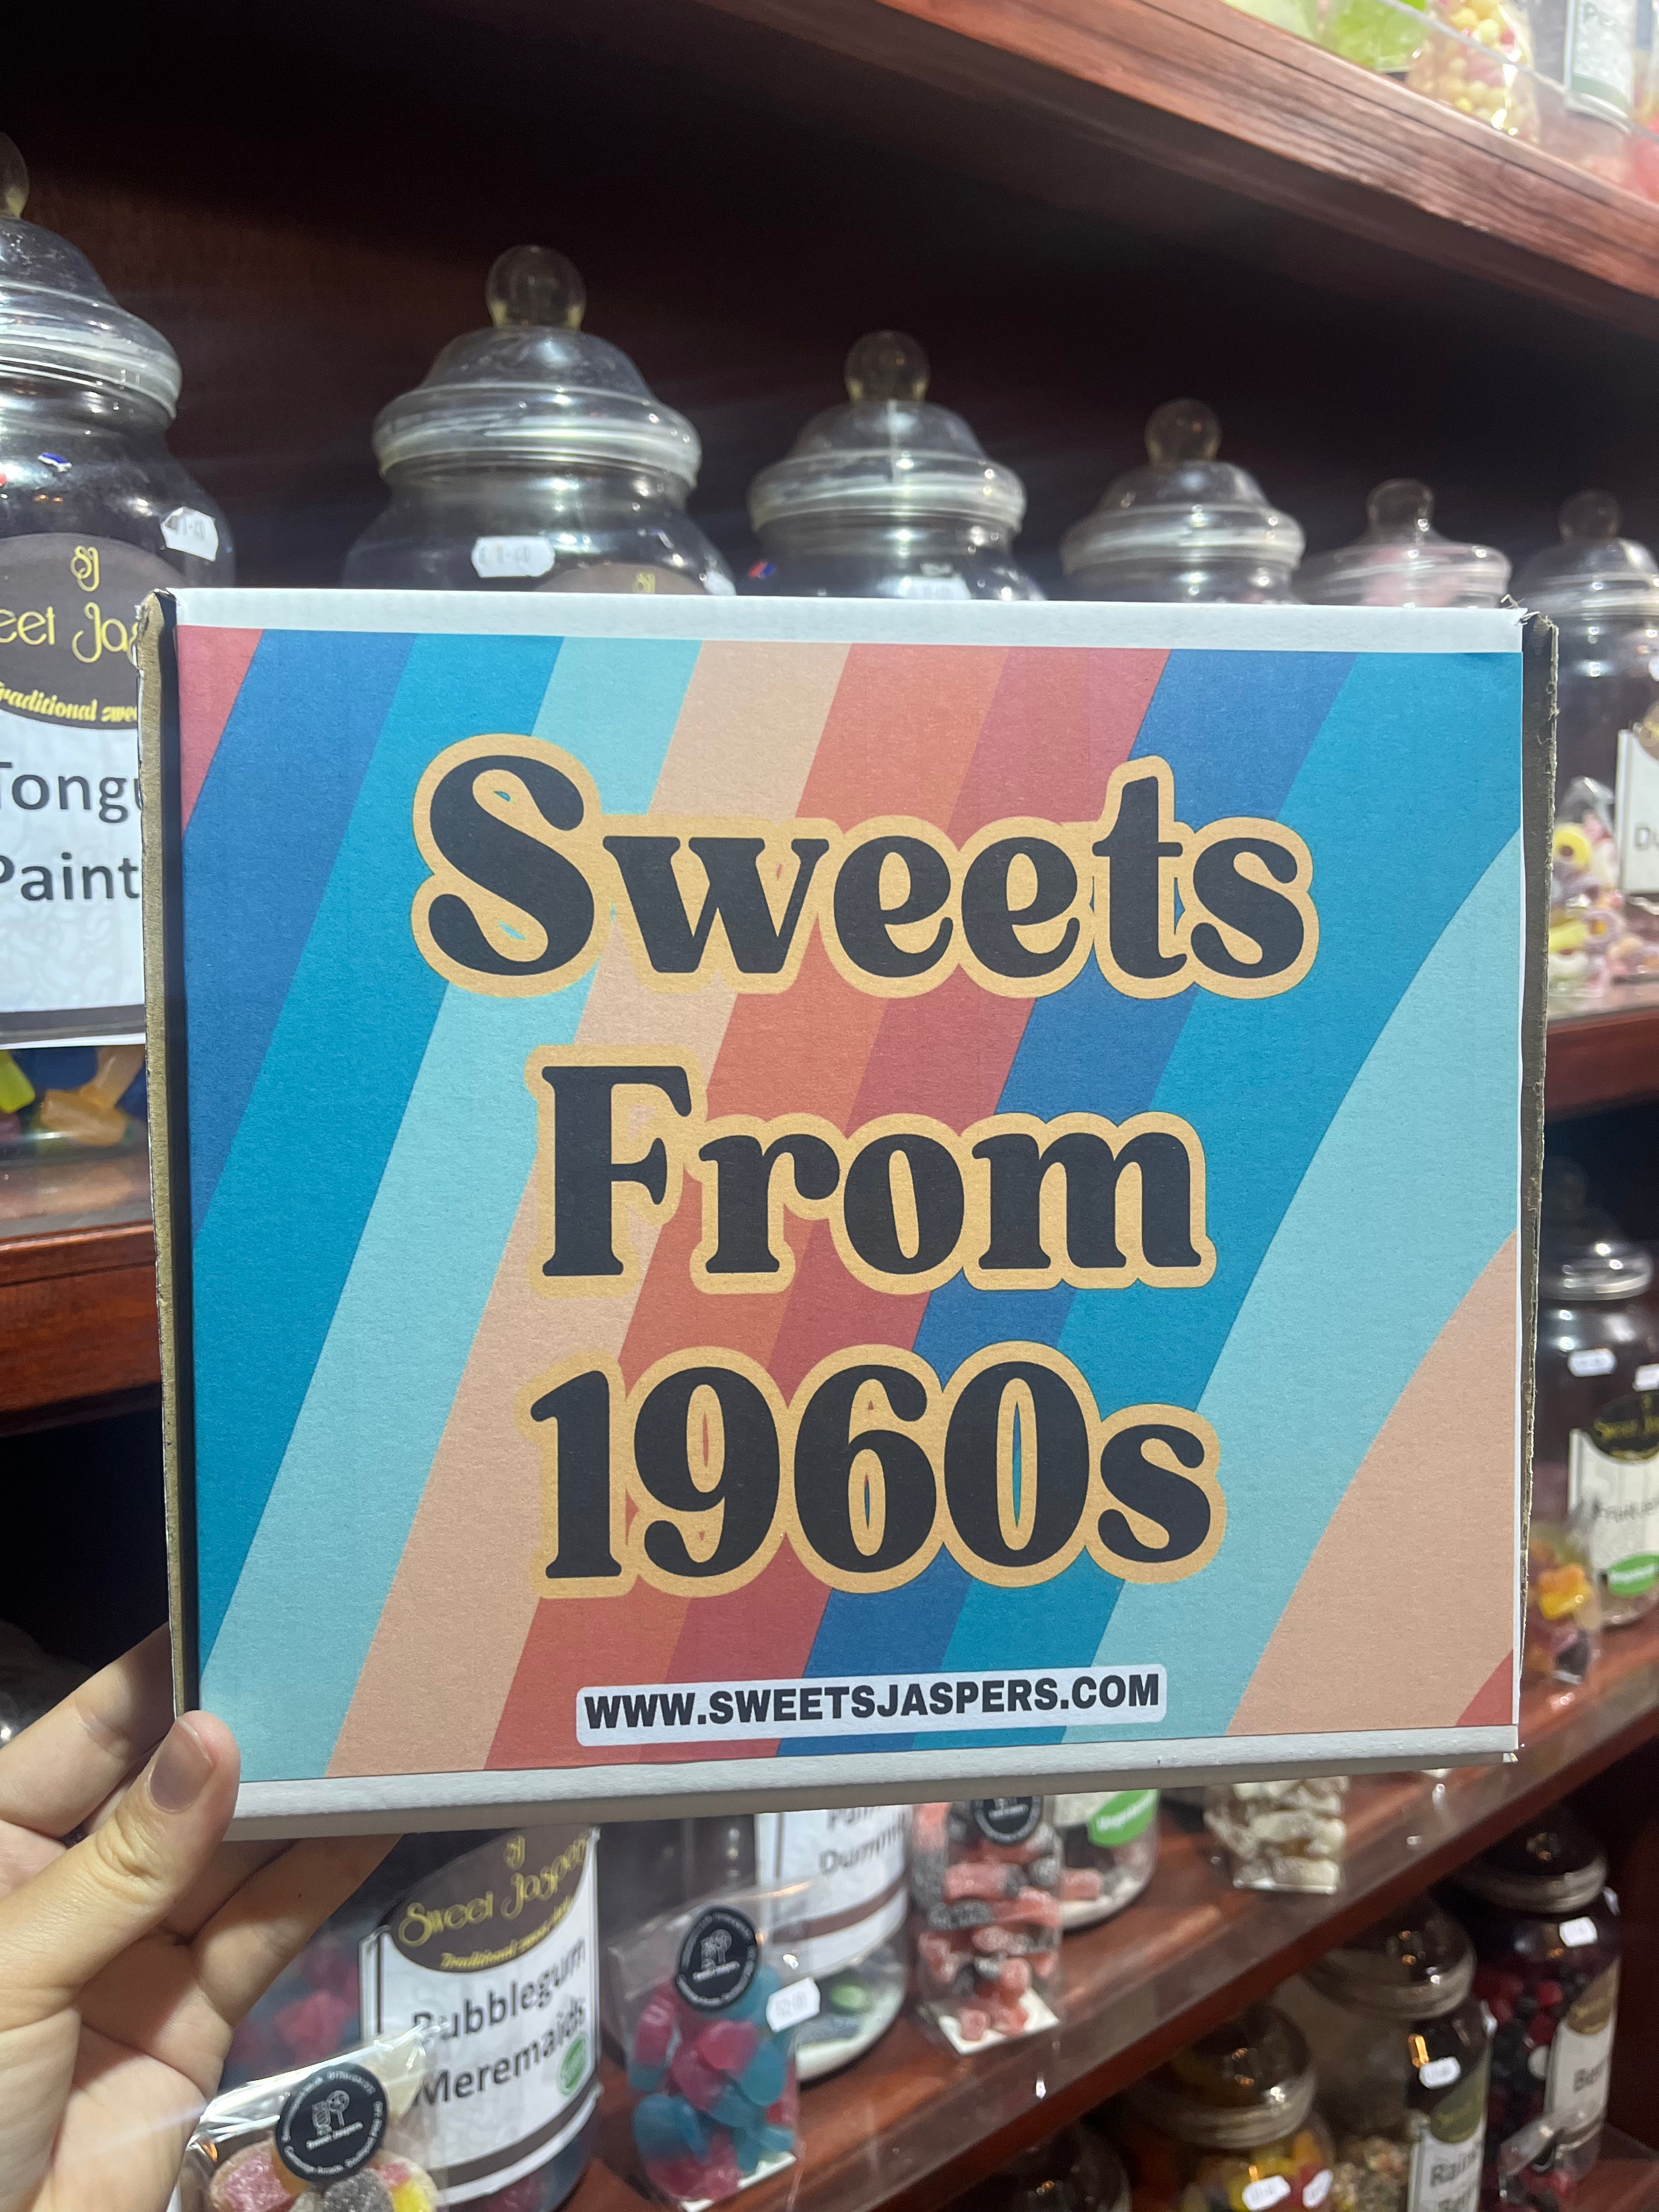 Sweets from 1960s